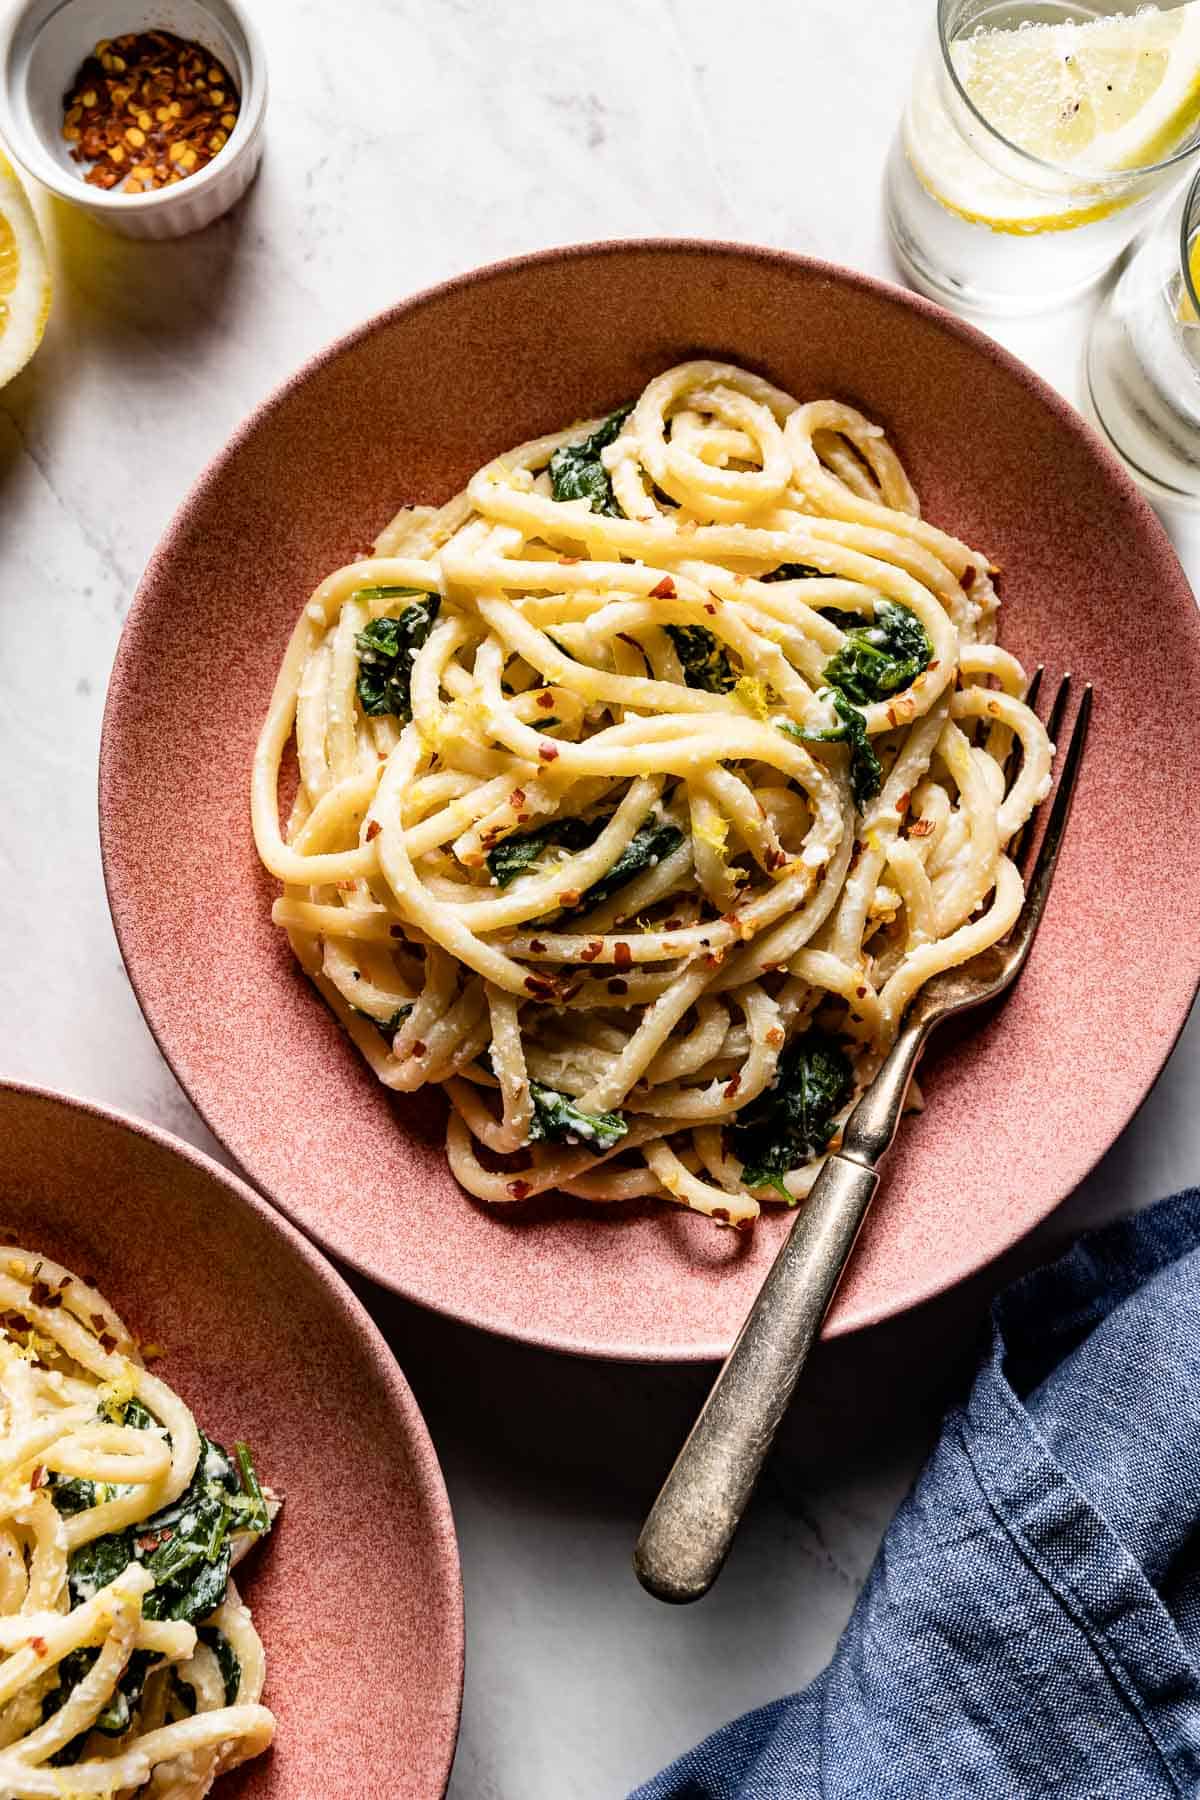 Spinach ricotta pasta in a bowl with a fork on the side